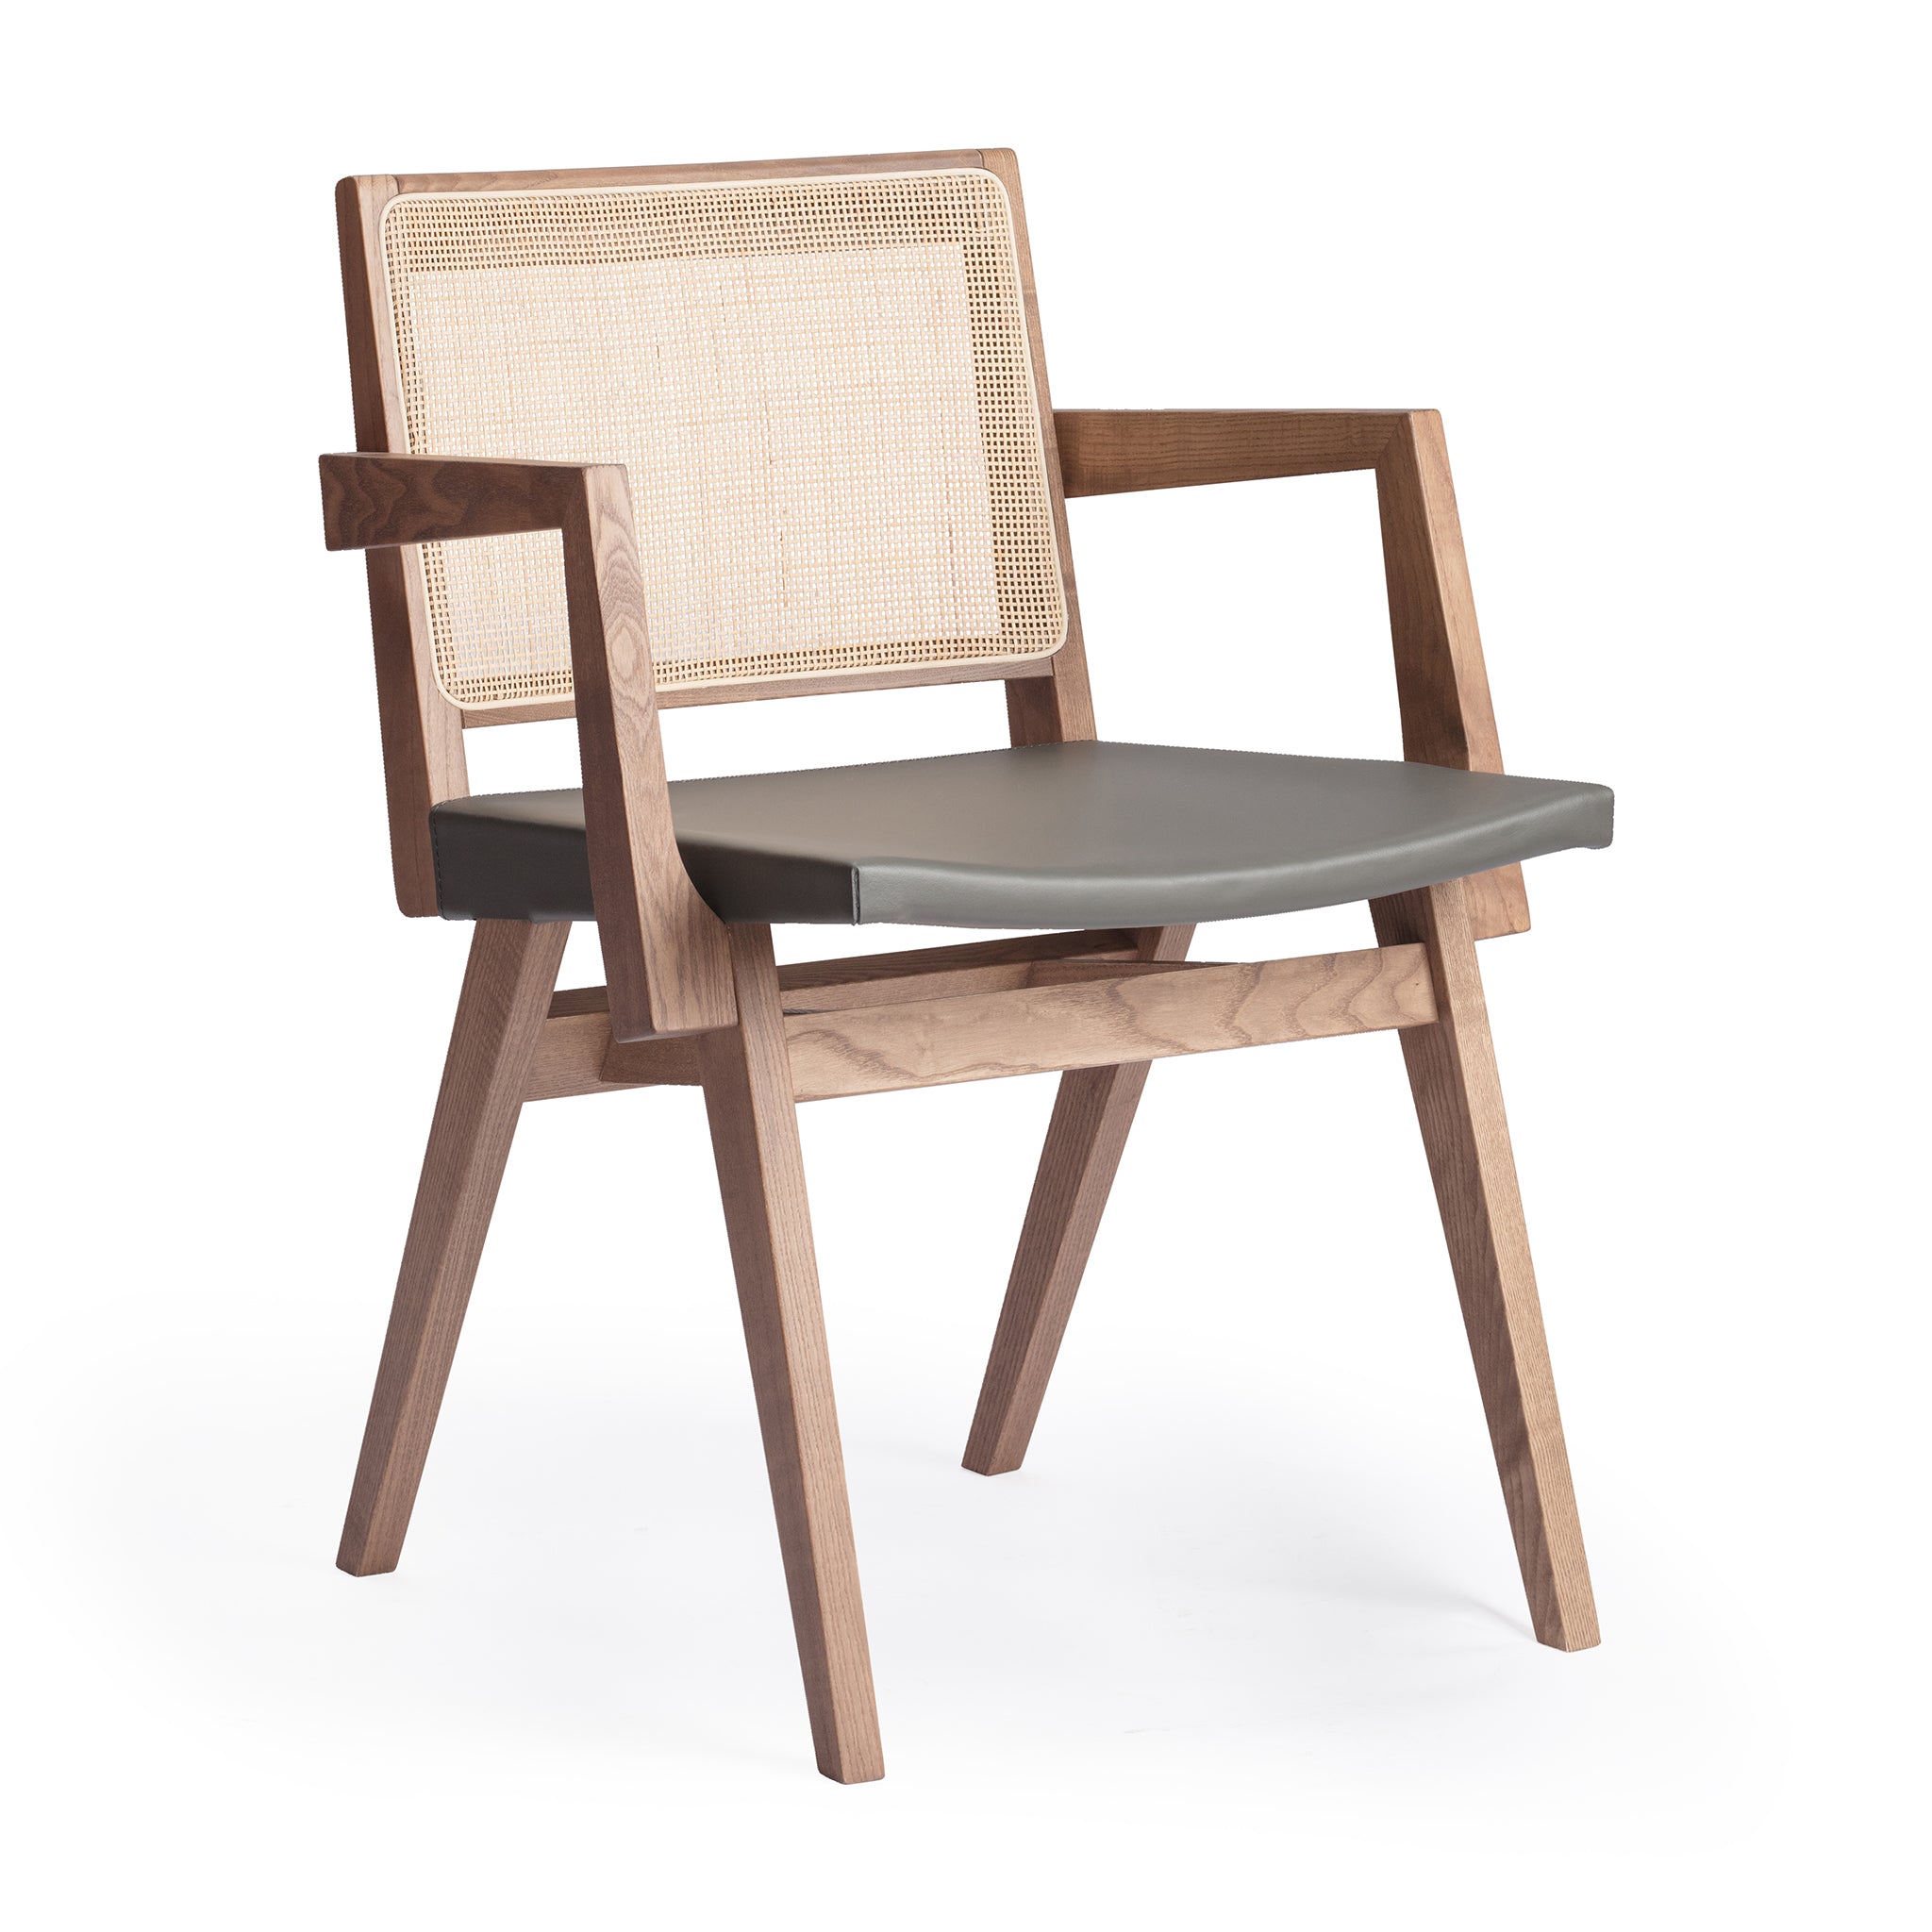 Main view of an "Elye" designer dining chair, walnut stained ash frame, square weave cane back, contract grade off white leather seat, produced by Klarel in Italy. #K40-2